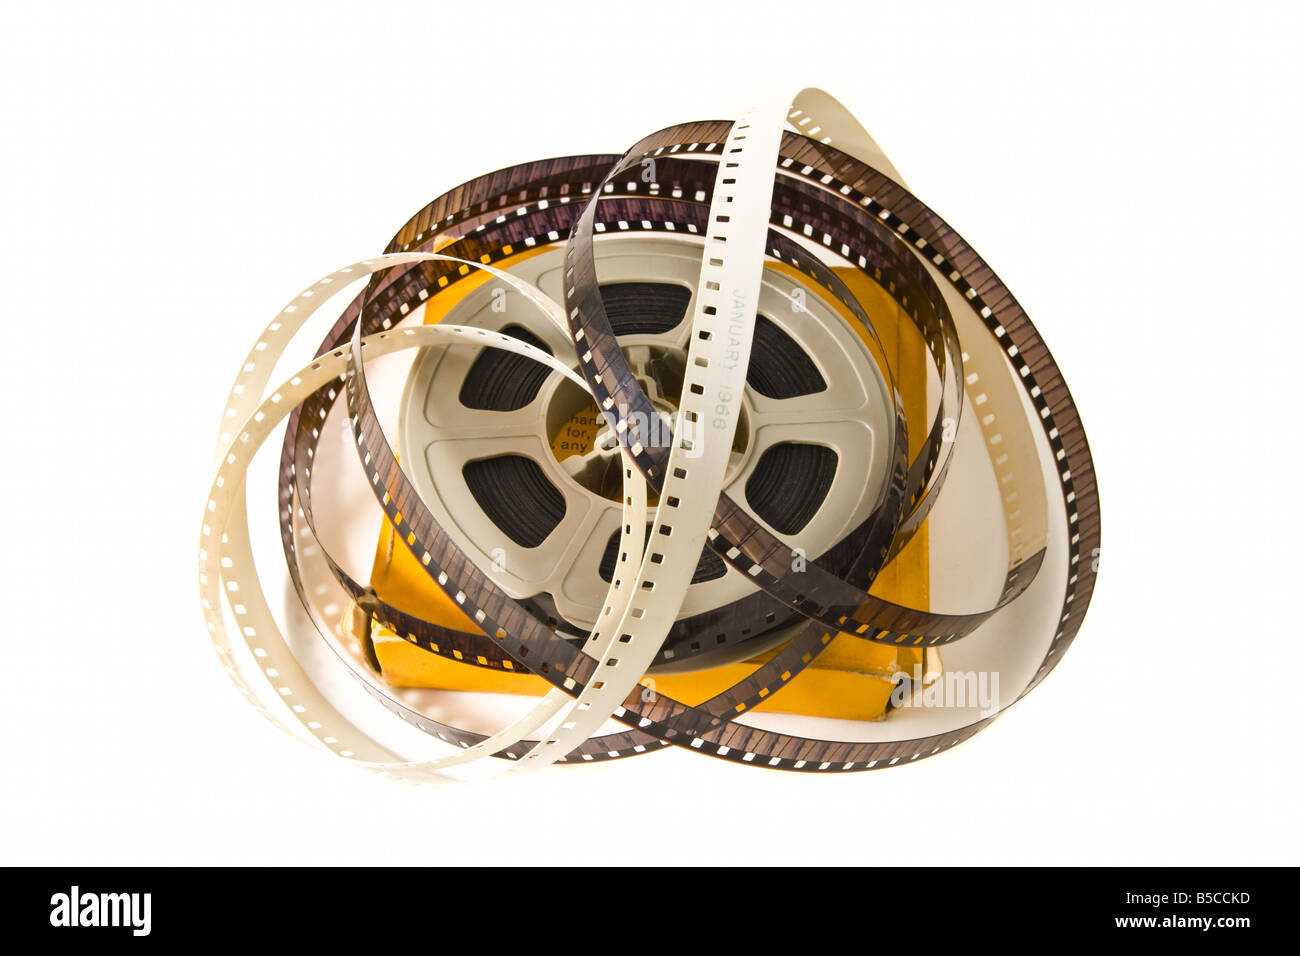 Reel box Cut Out Stock Images & Pictures - Alamy